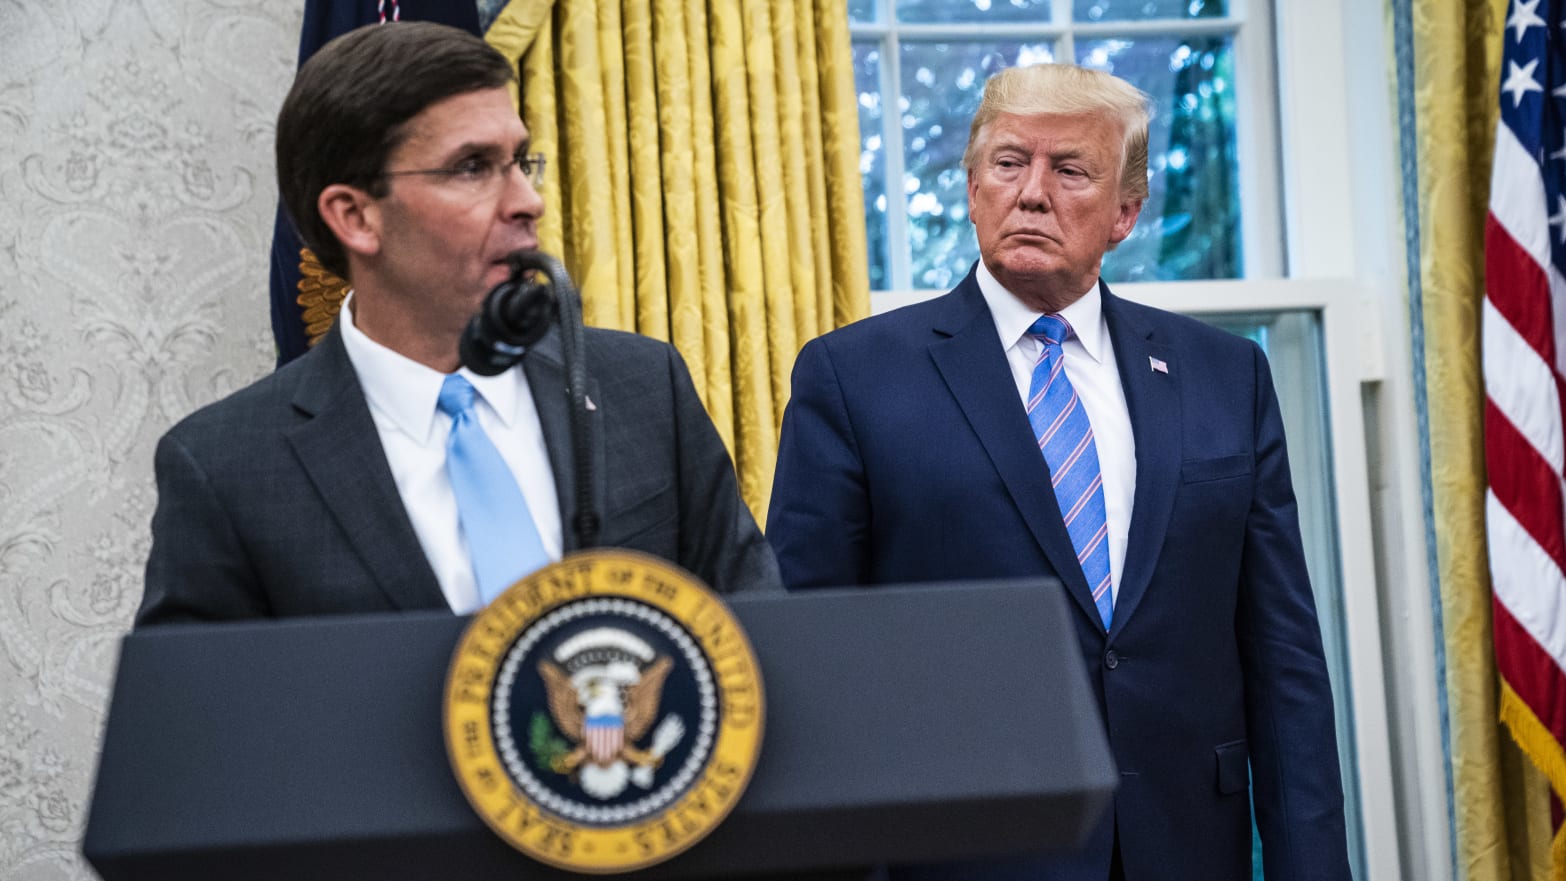 President Donald J. Trump watches as Mark Esper speaks after being sworn in as Secretary of Defense by Associate Justice of the Supreme Court Samuel Alito in the Oval Office at the White House on Tuesday, July 23, 2019 in Washington, DC.